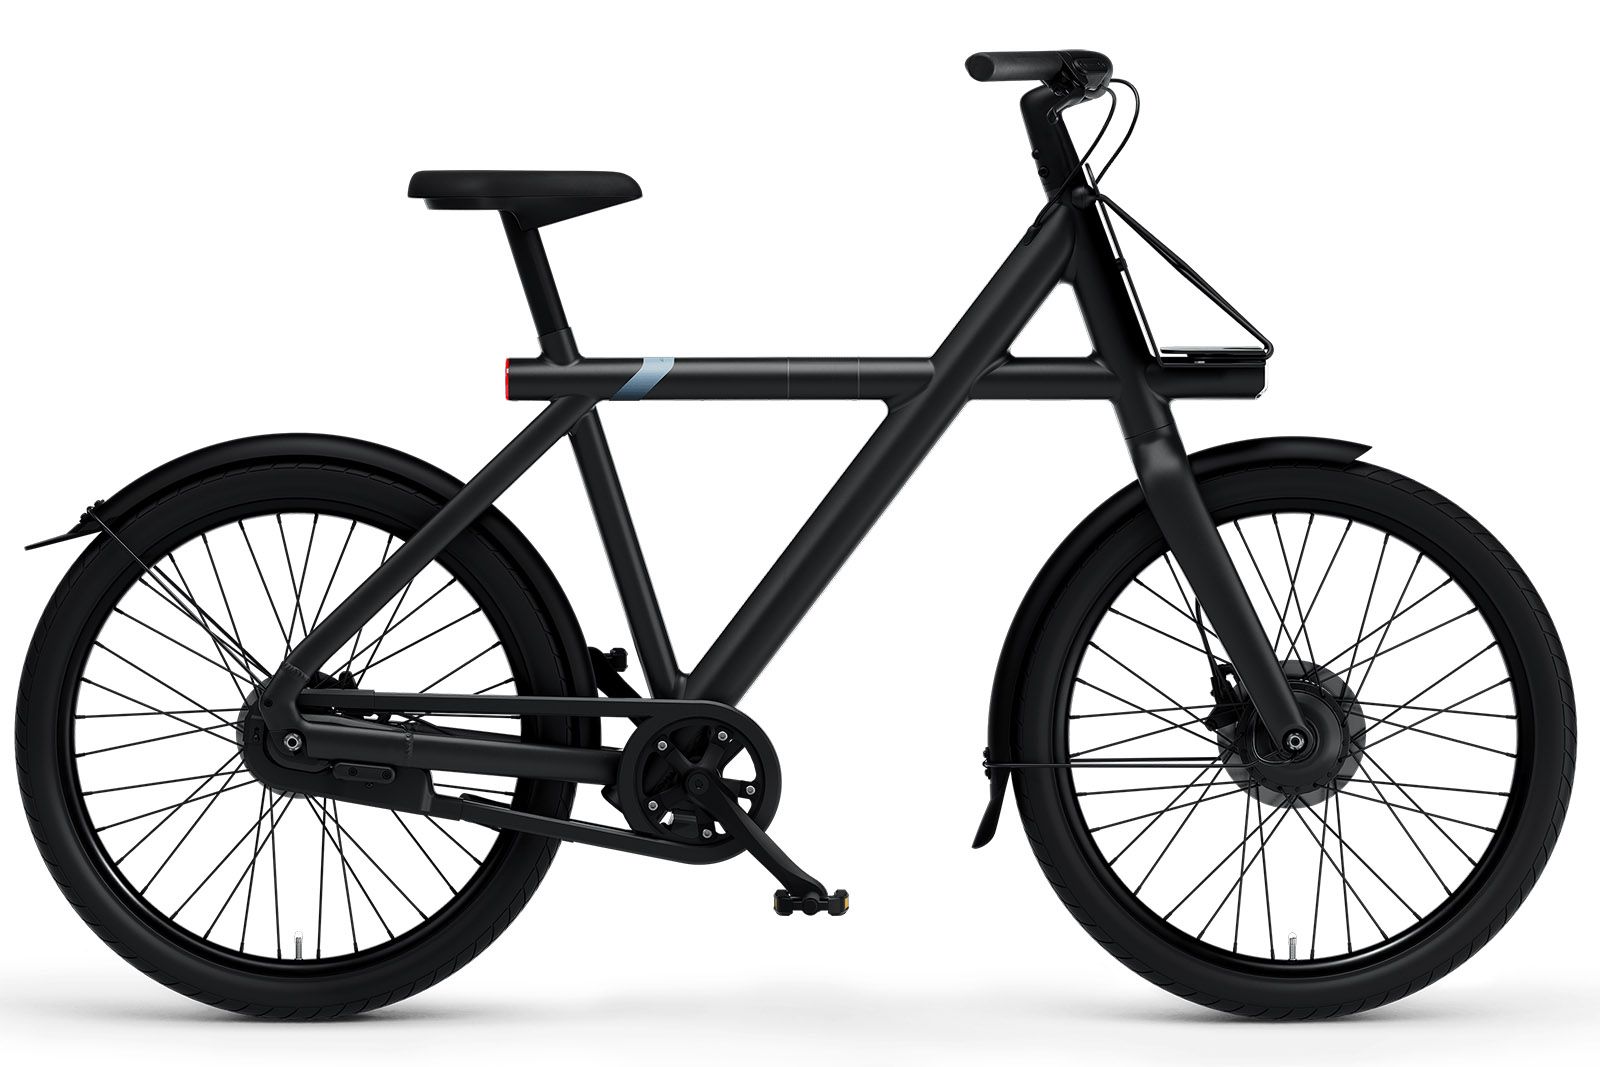 VanMoof uses Apple's Find My to help track your stolen eBike